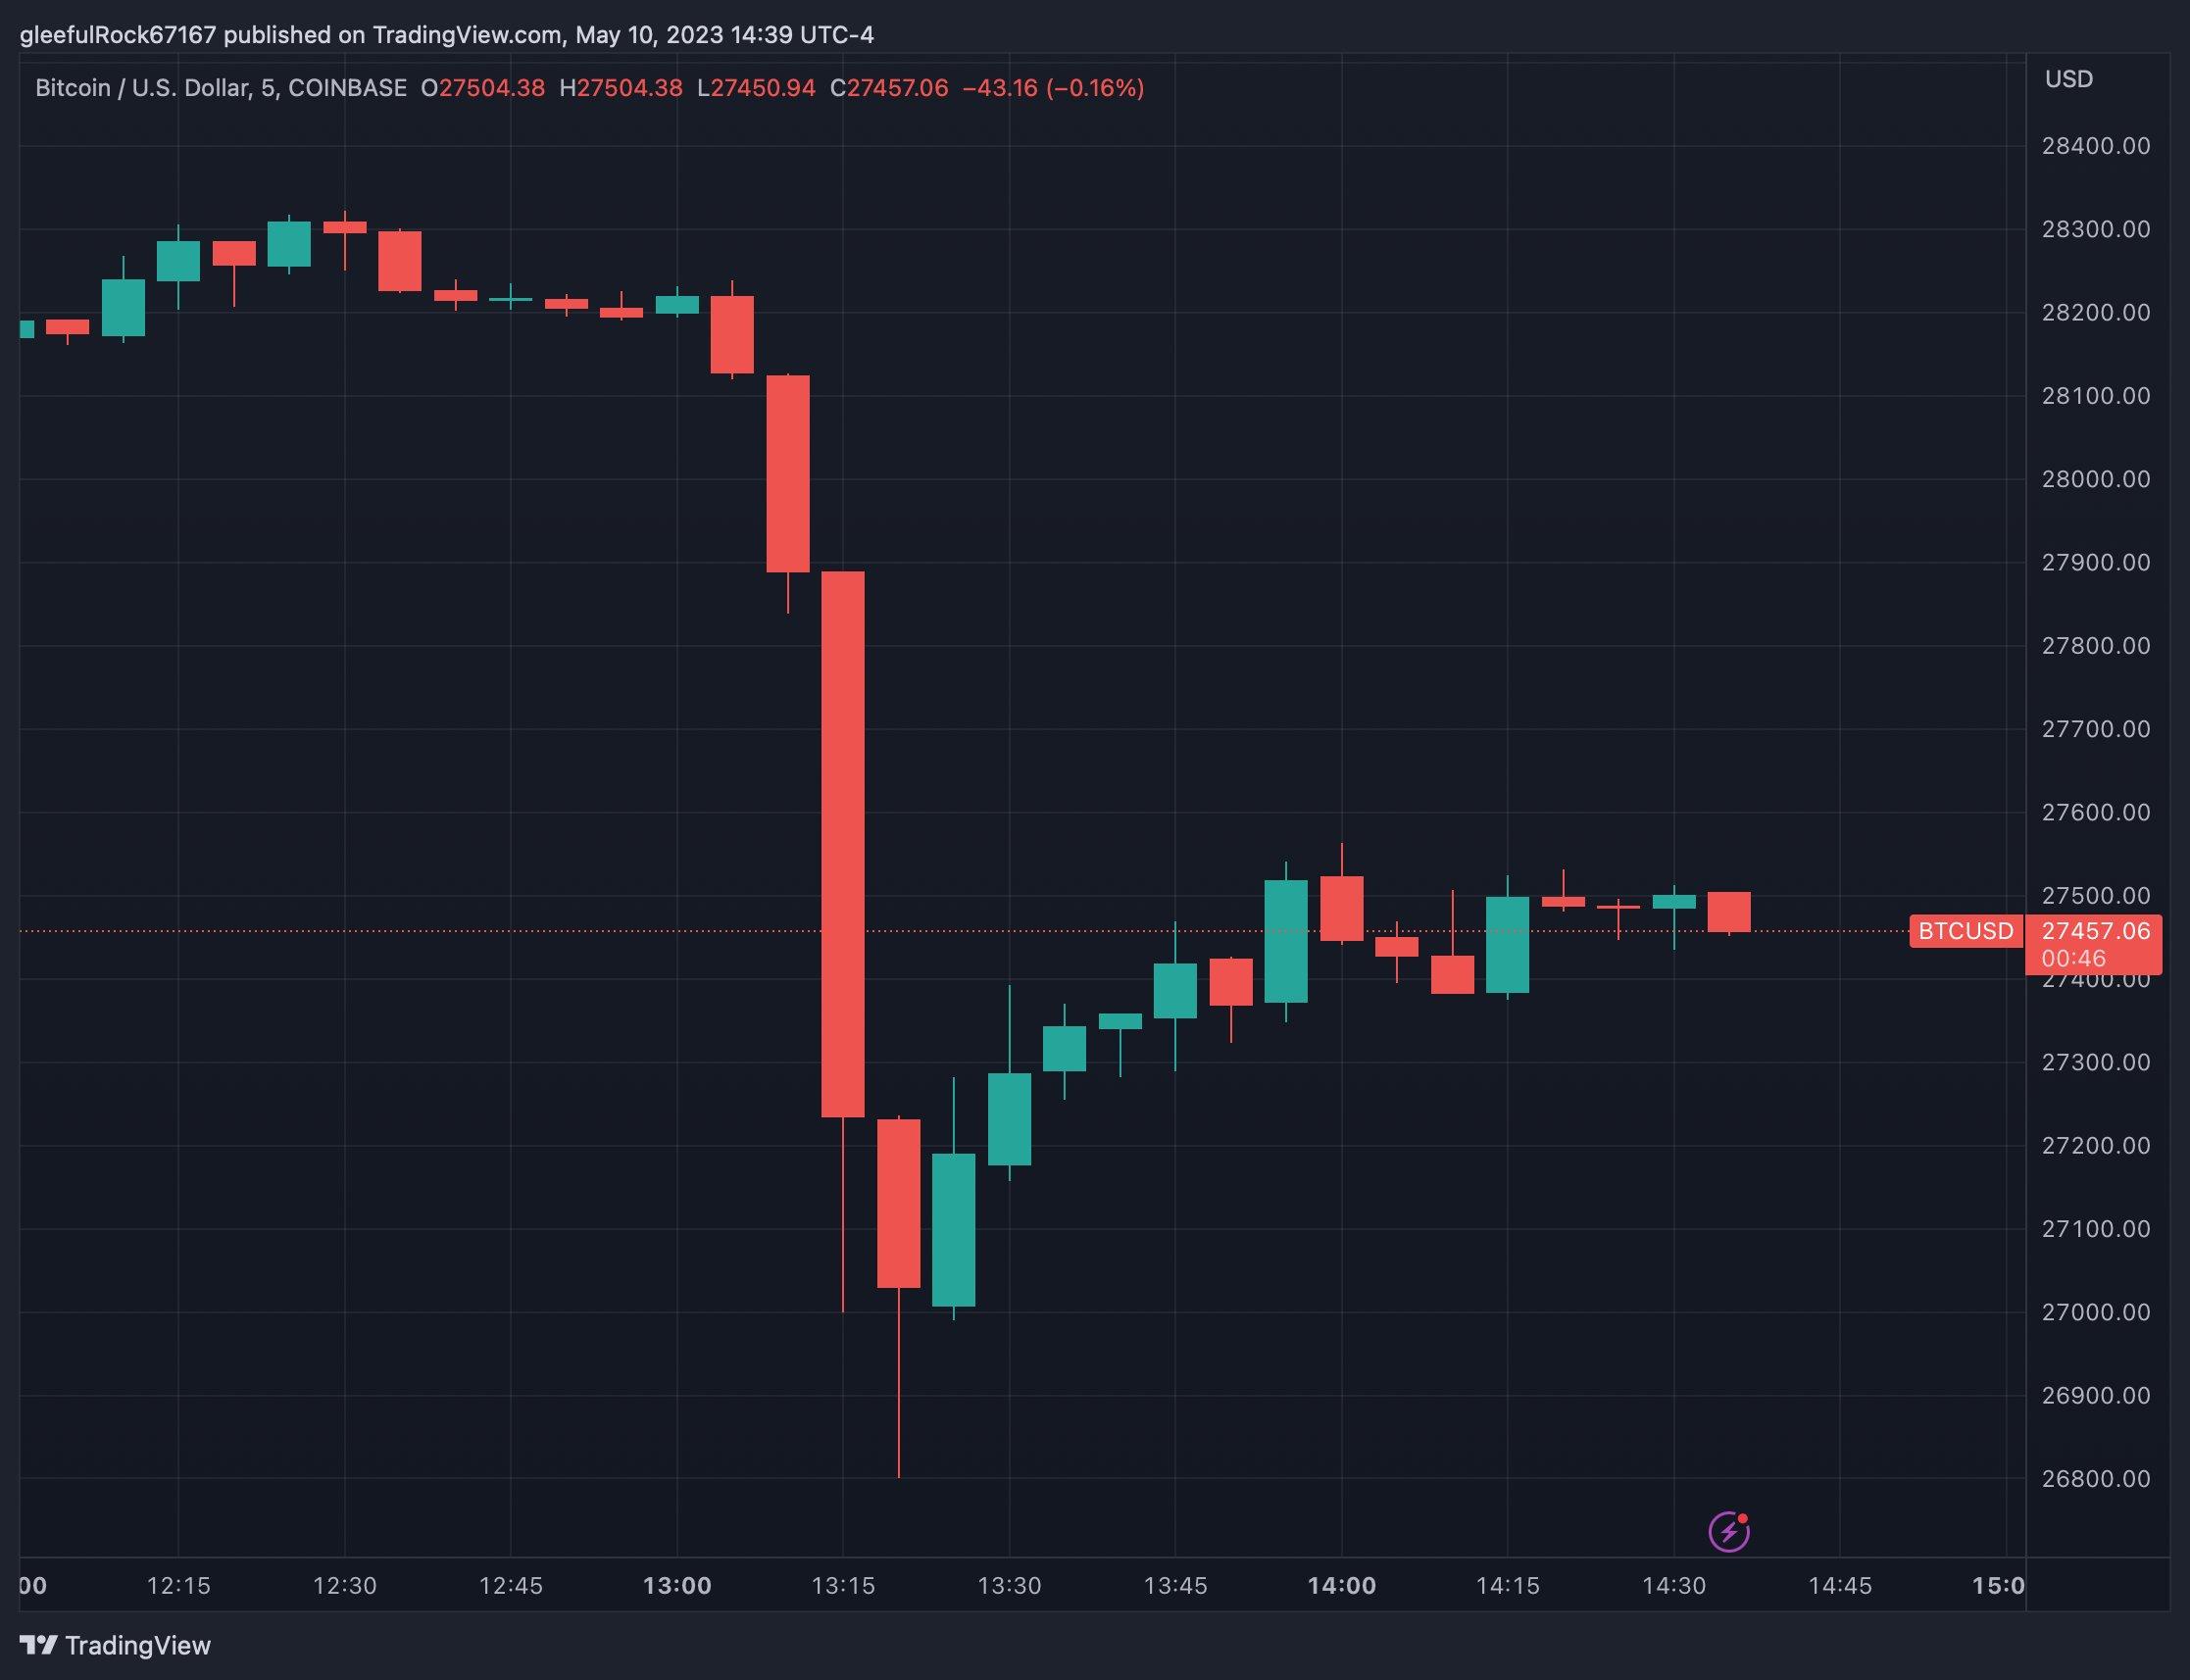 BTC drops after rumors of the US government selling seized Bitcoins